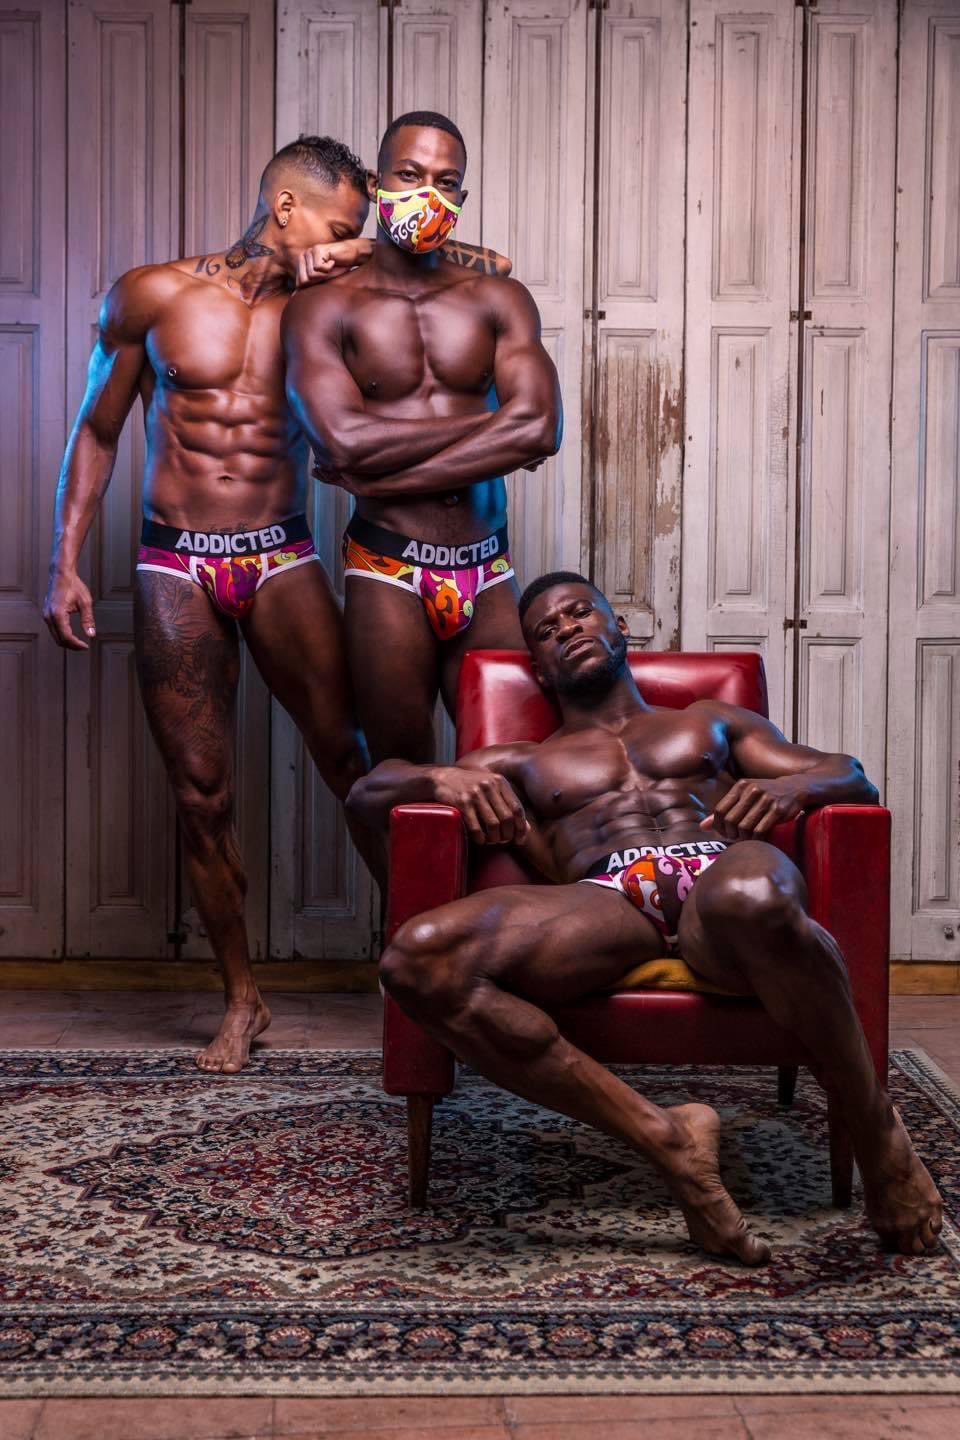 Black Body Amsterdam on X: ADDICTED underwear, swimwear, sports and  streetwear as well as ADDICTED FETISH gear are available at Black Body  Amsterdam. New arrivals every other week. Check out all items